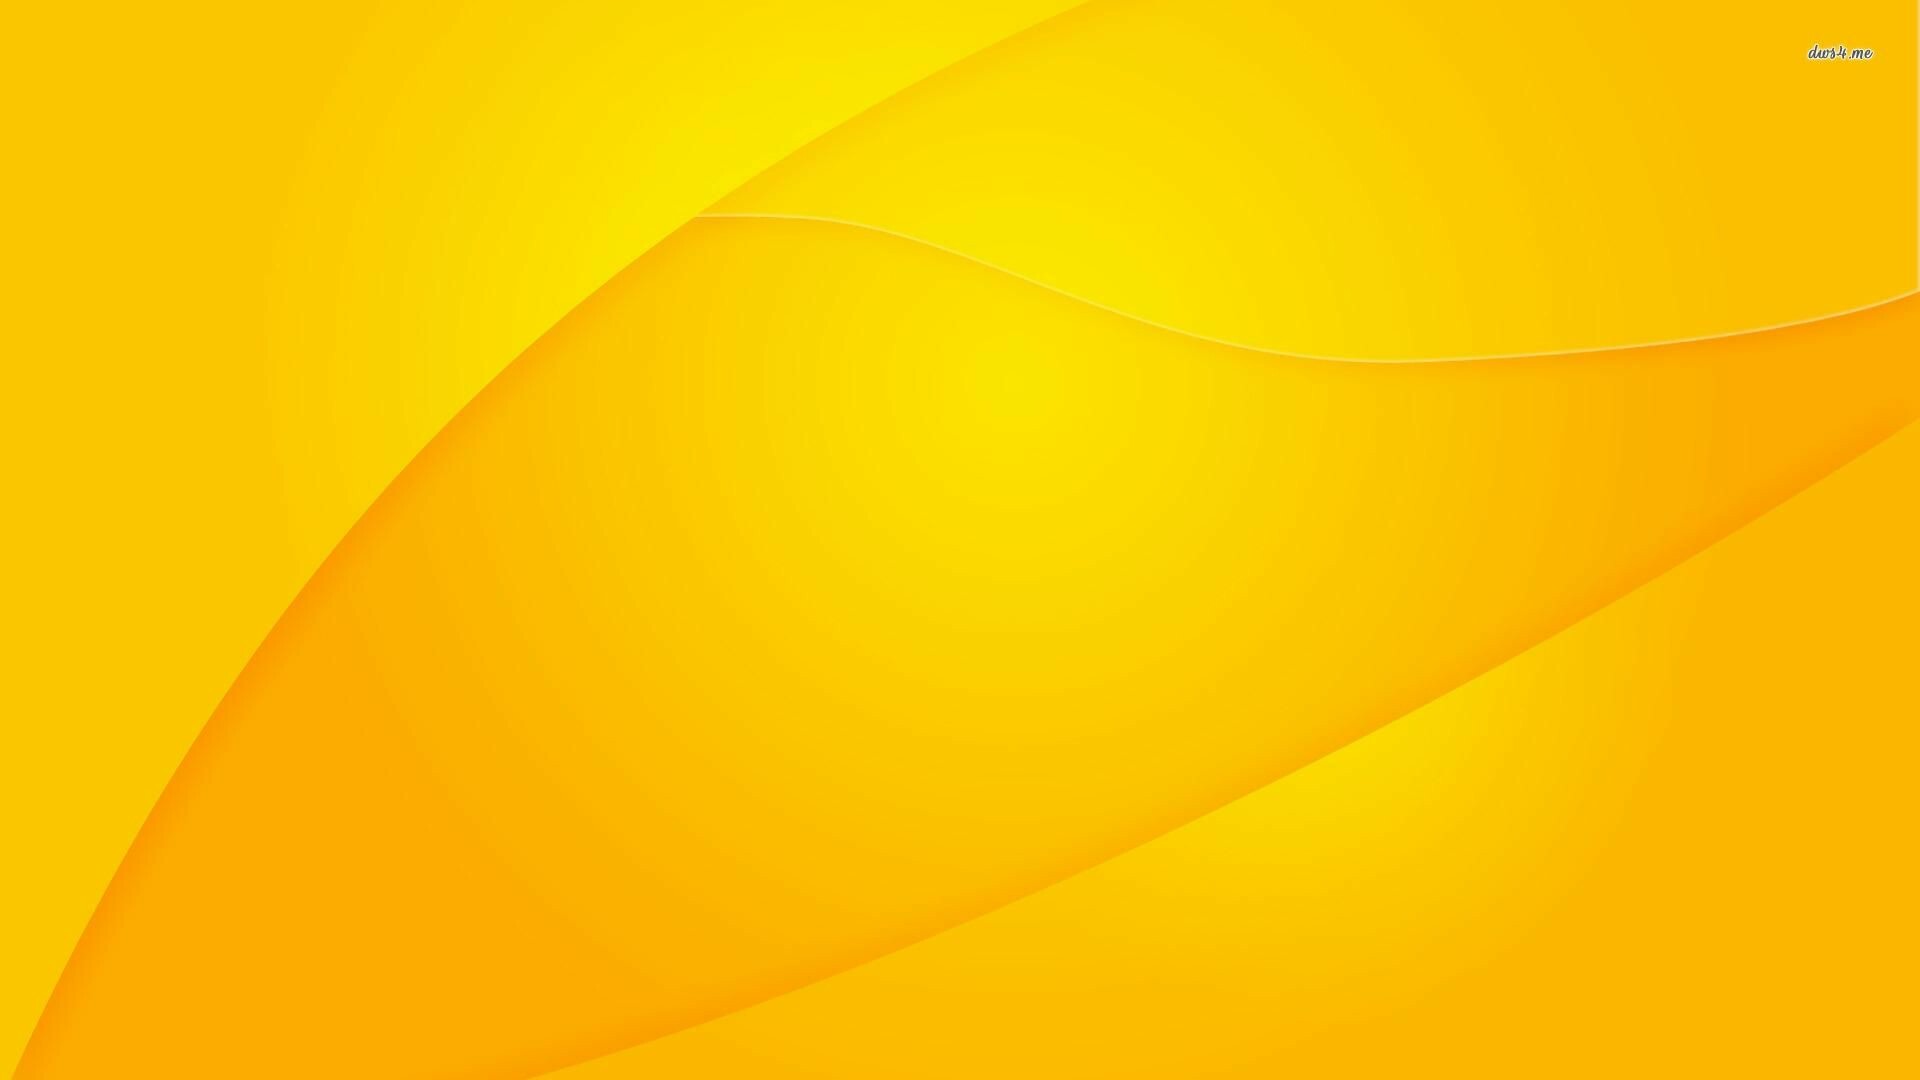 Yellow Wallpaper: HD, 4K, 5K for PC and Mobile. Download free image for iPhone, Android